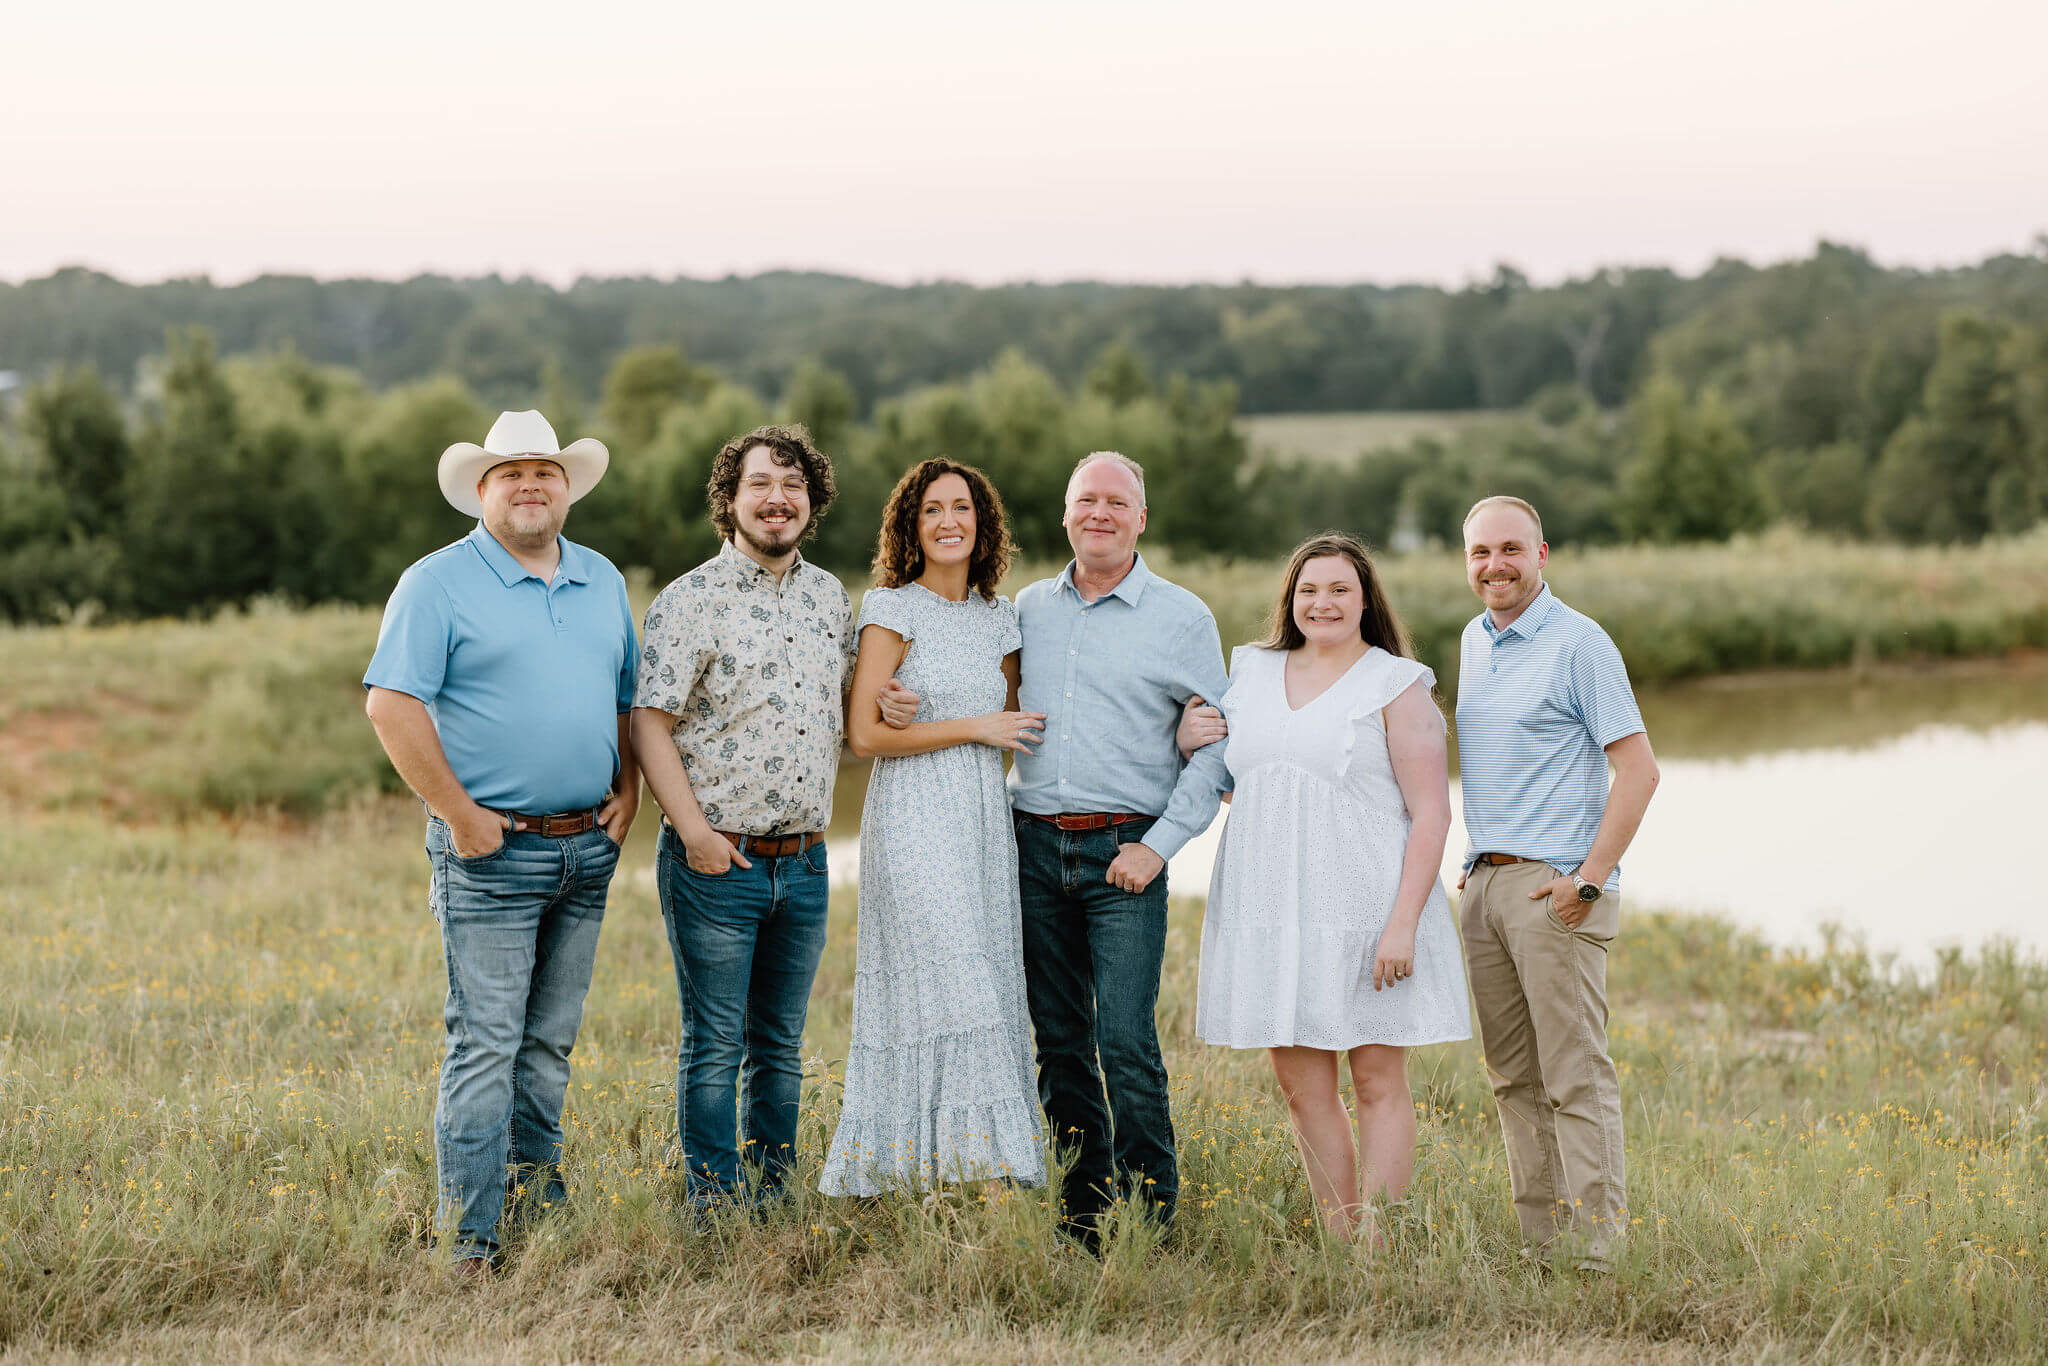 Family picture of family in coordinating summer wardrobe standing in open field at sunset